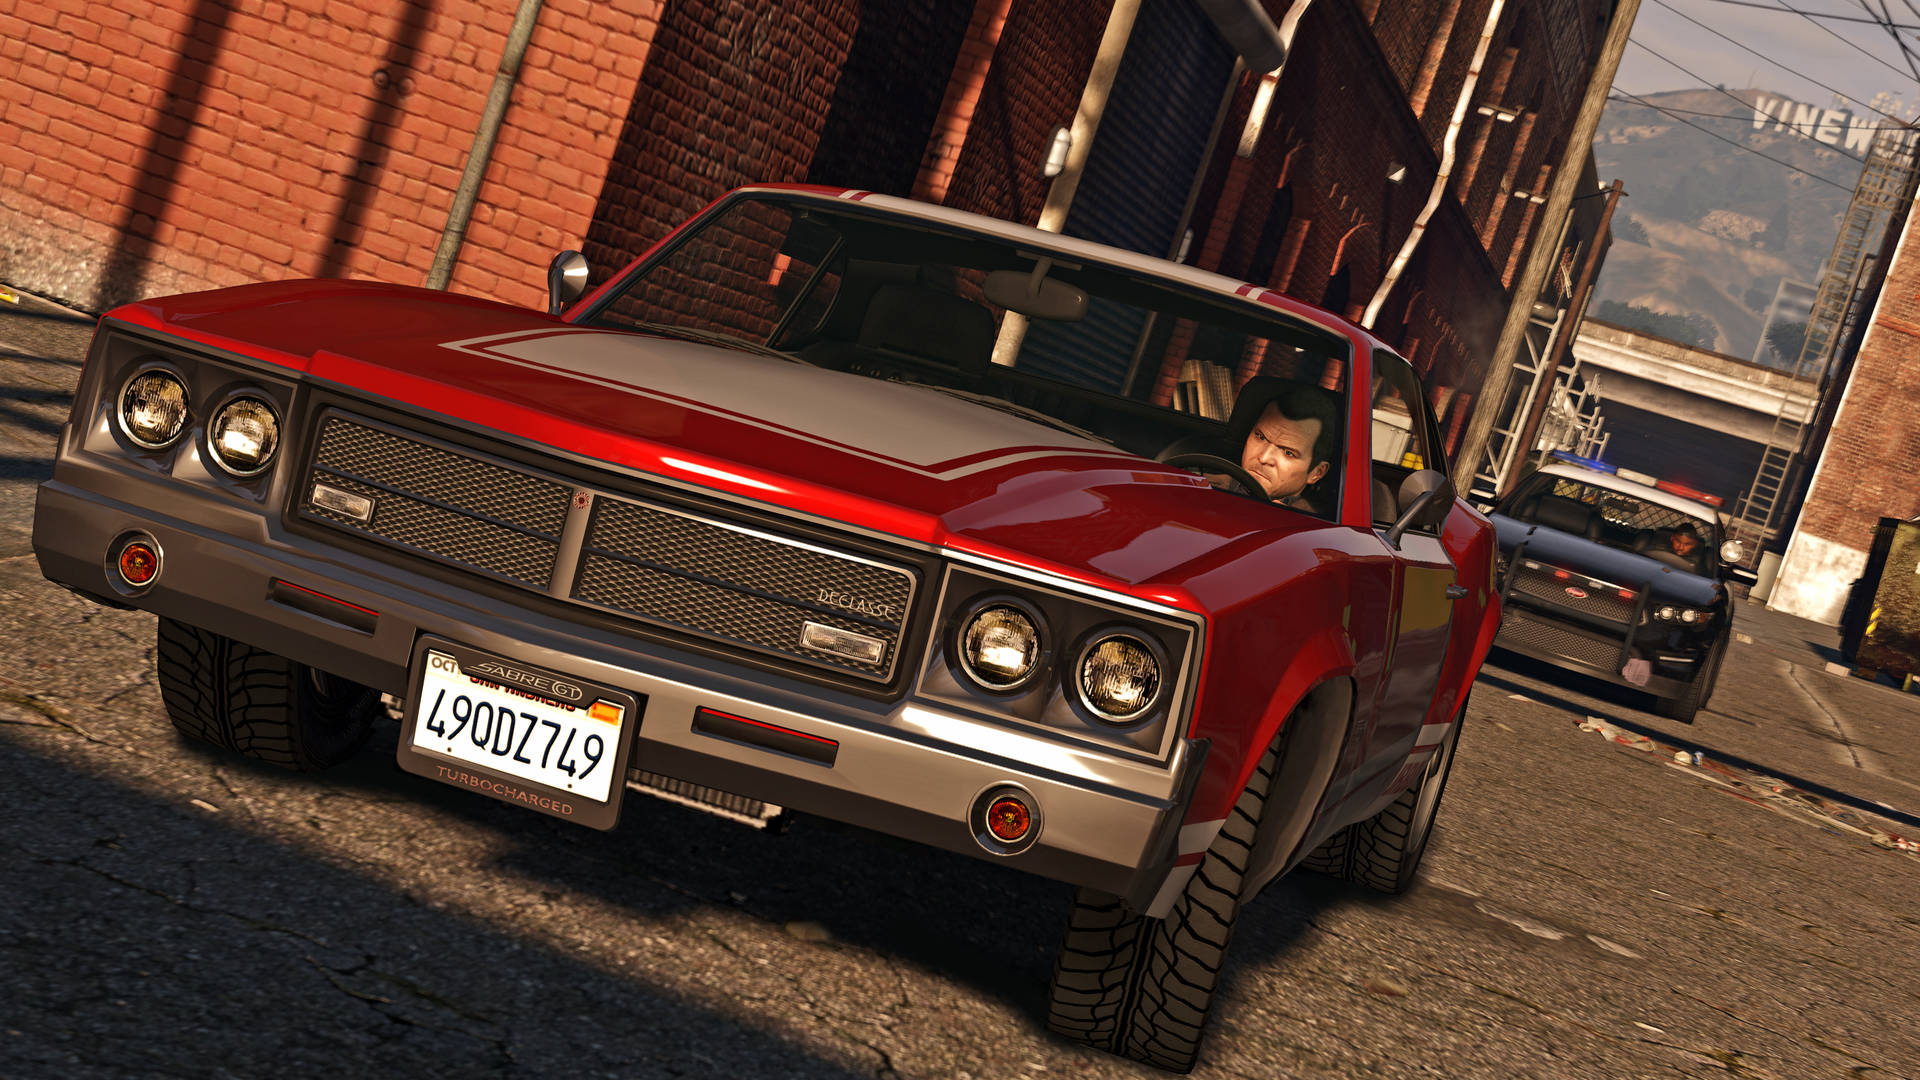 "Intense action scene from Grand Theft Auto V" Wallpaper